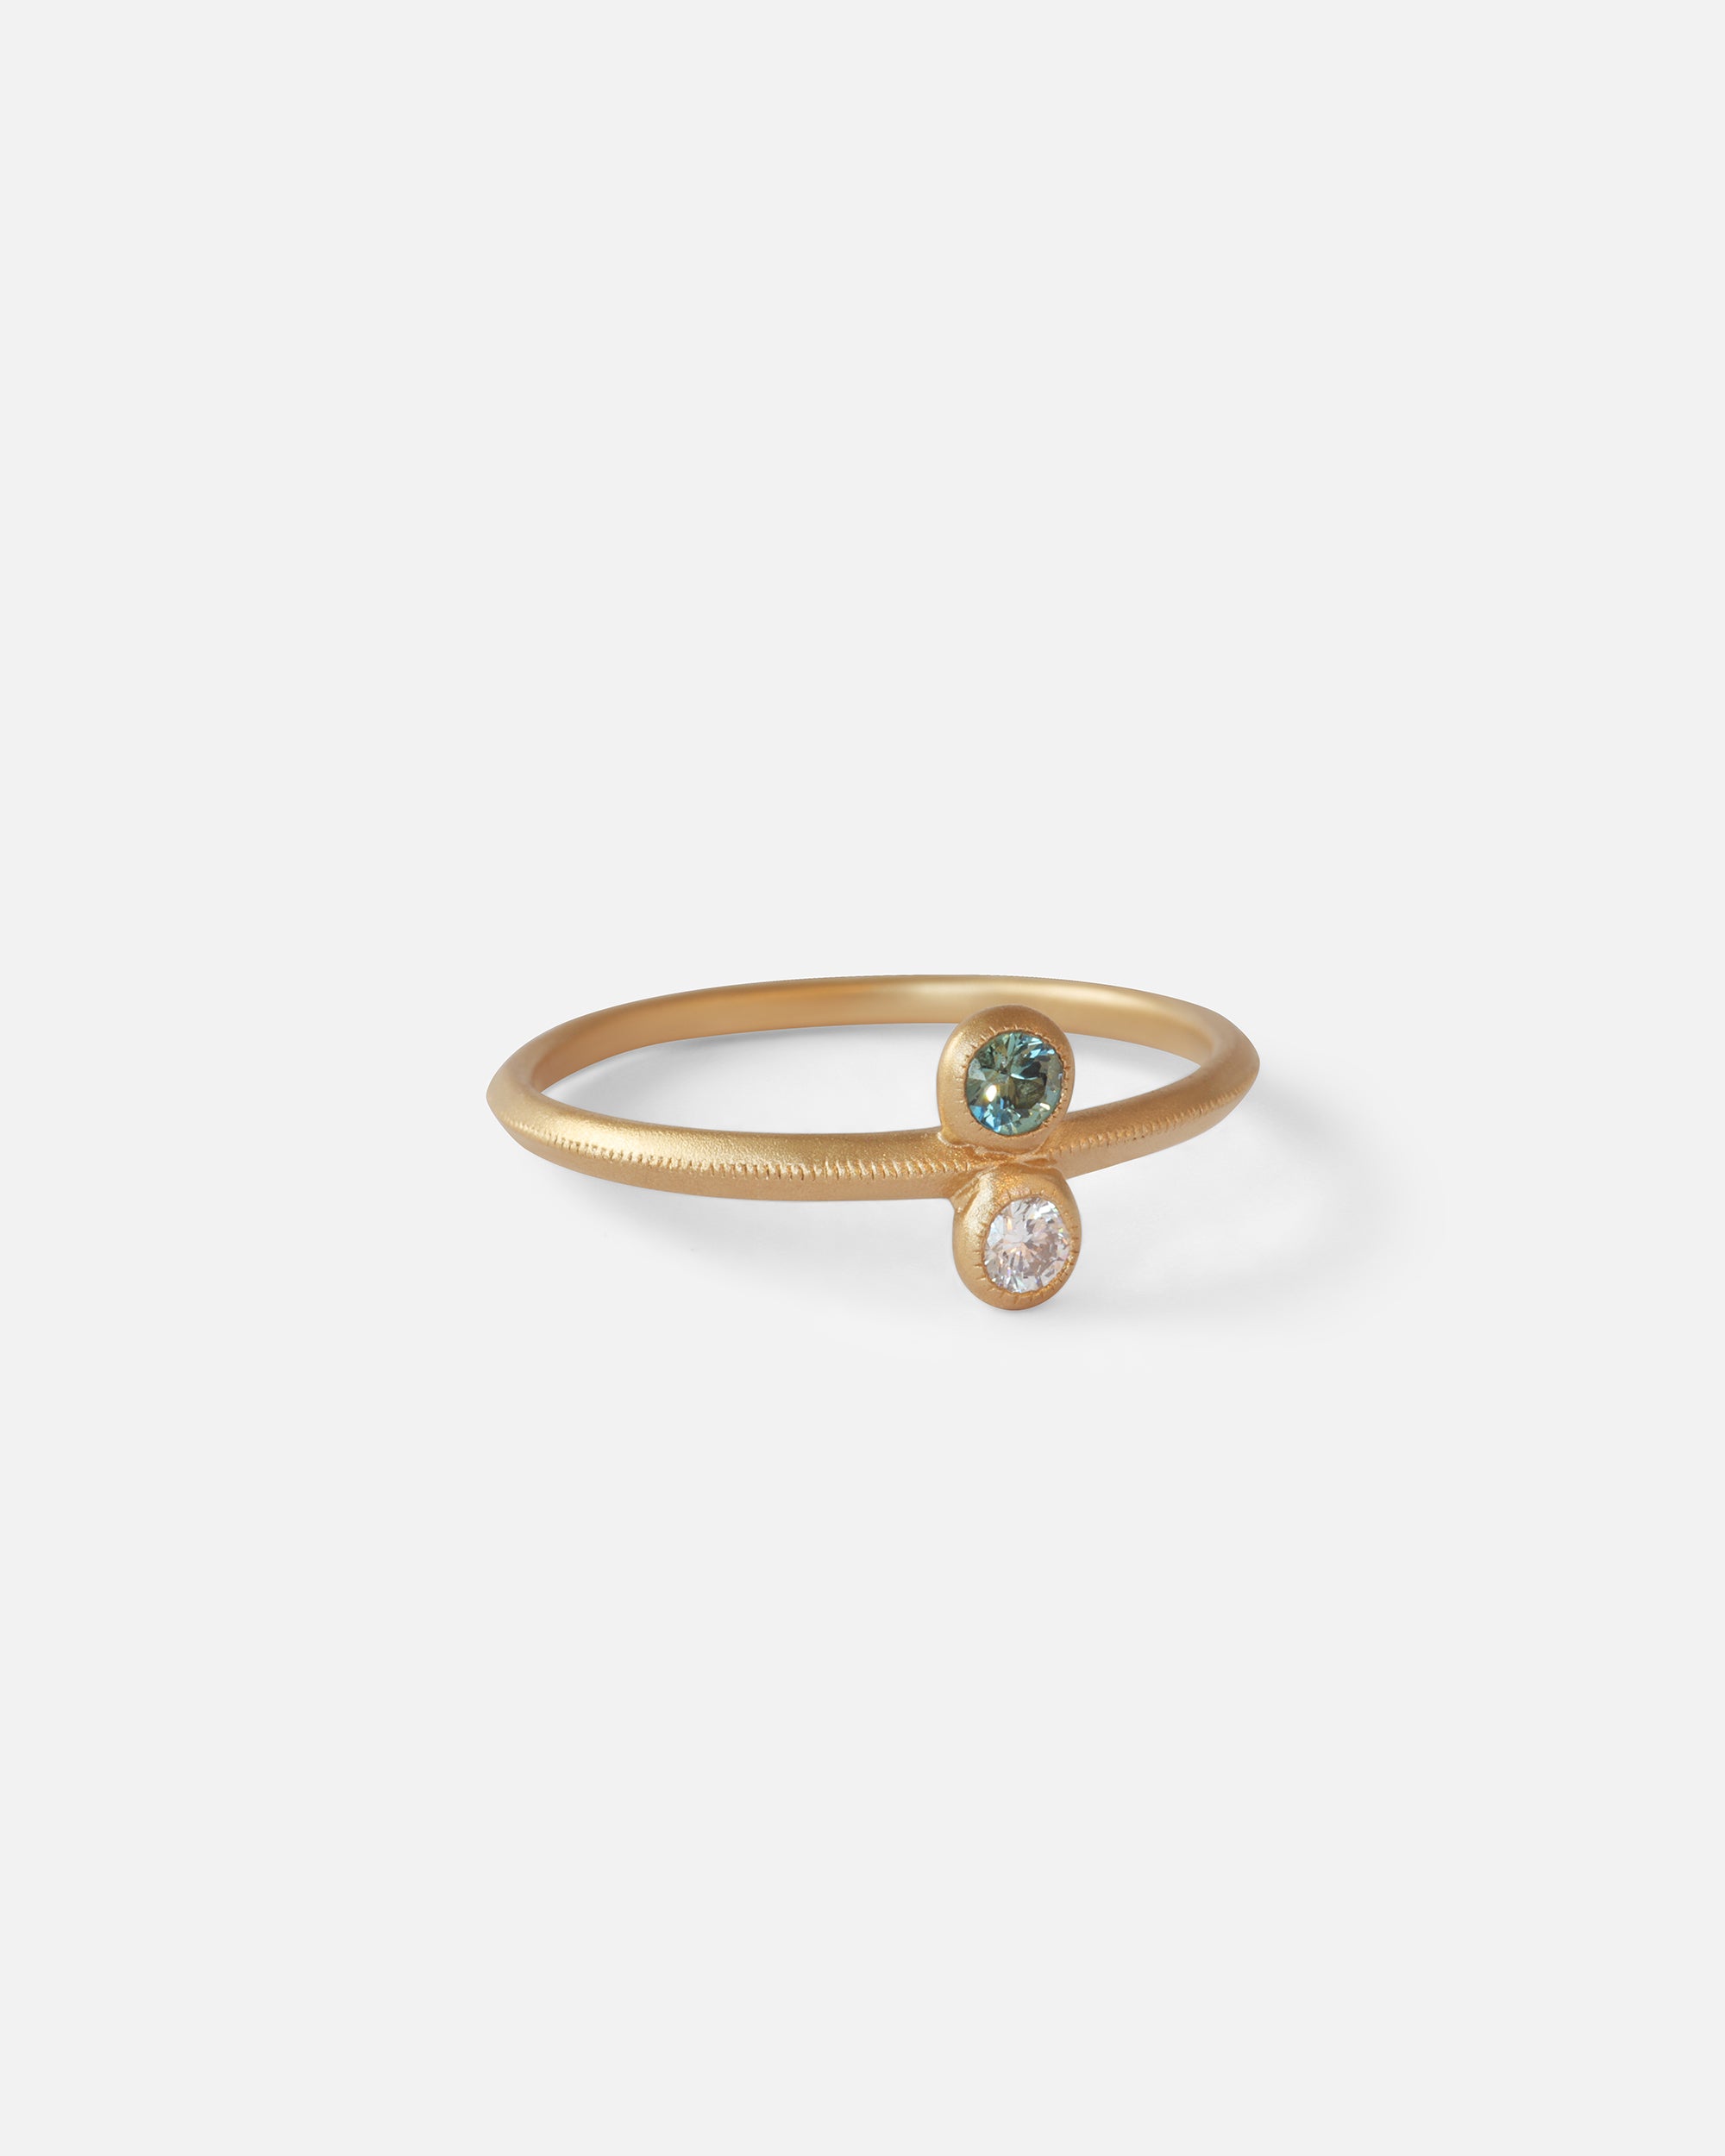 Toi et Moi / Blue Green Sapphire + Melee White Diamond Ring By fitzgerald jewelry